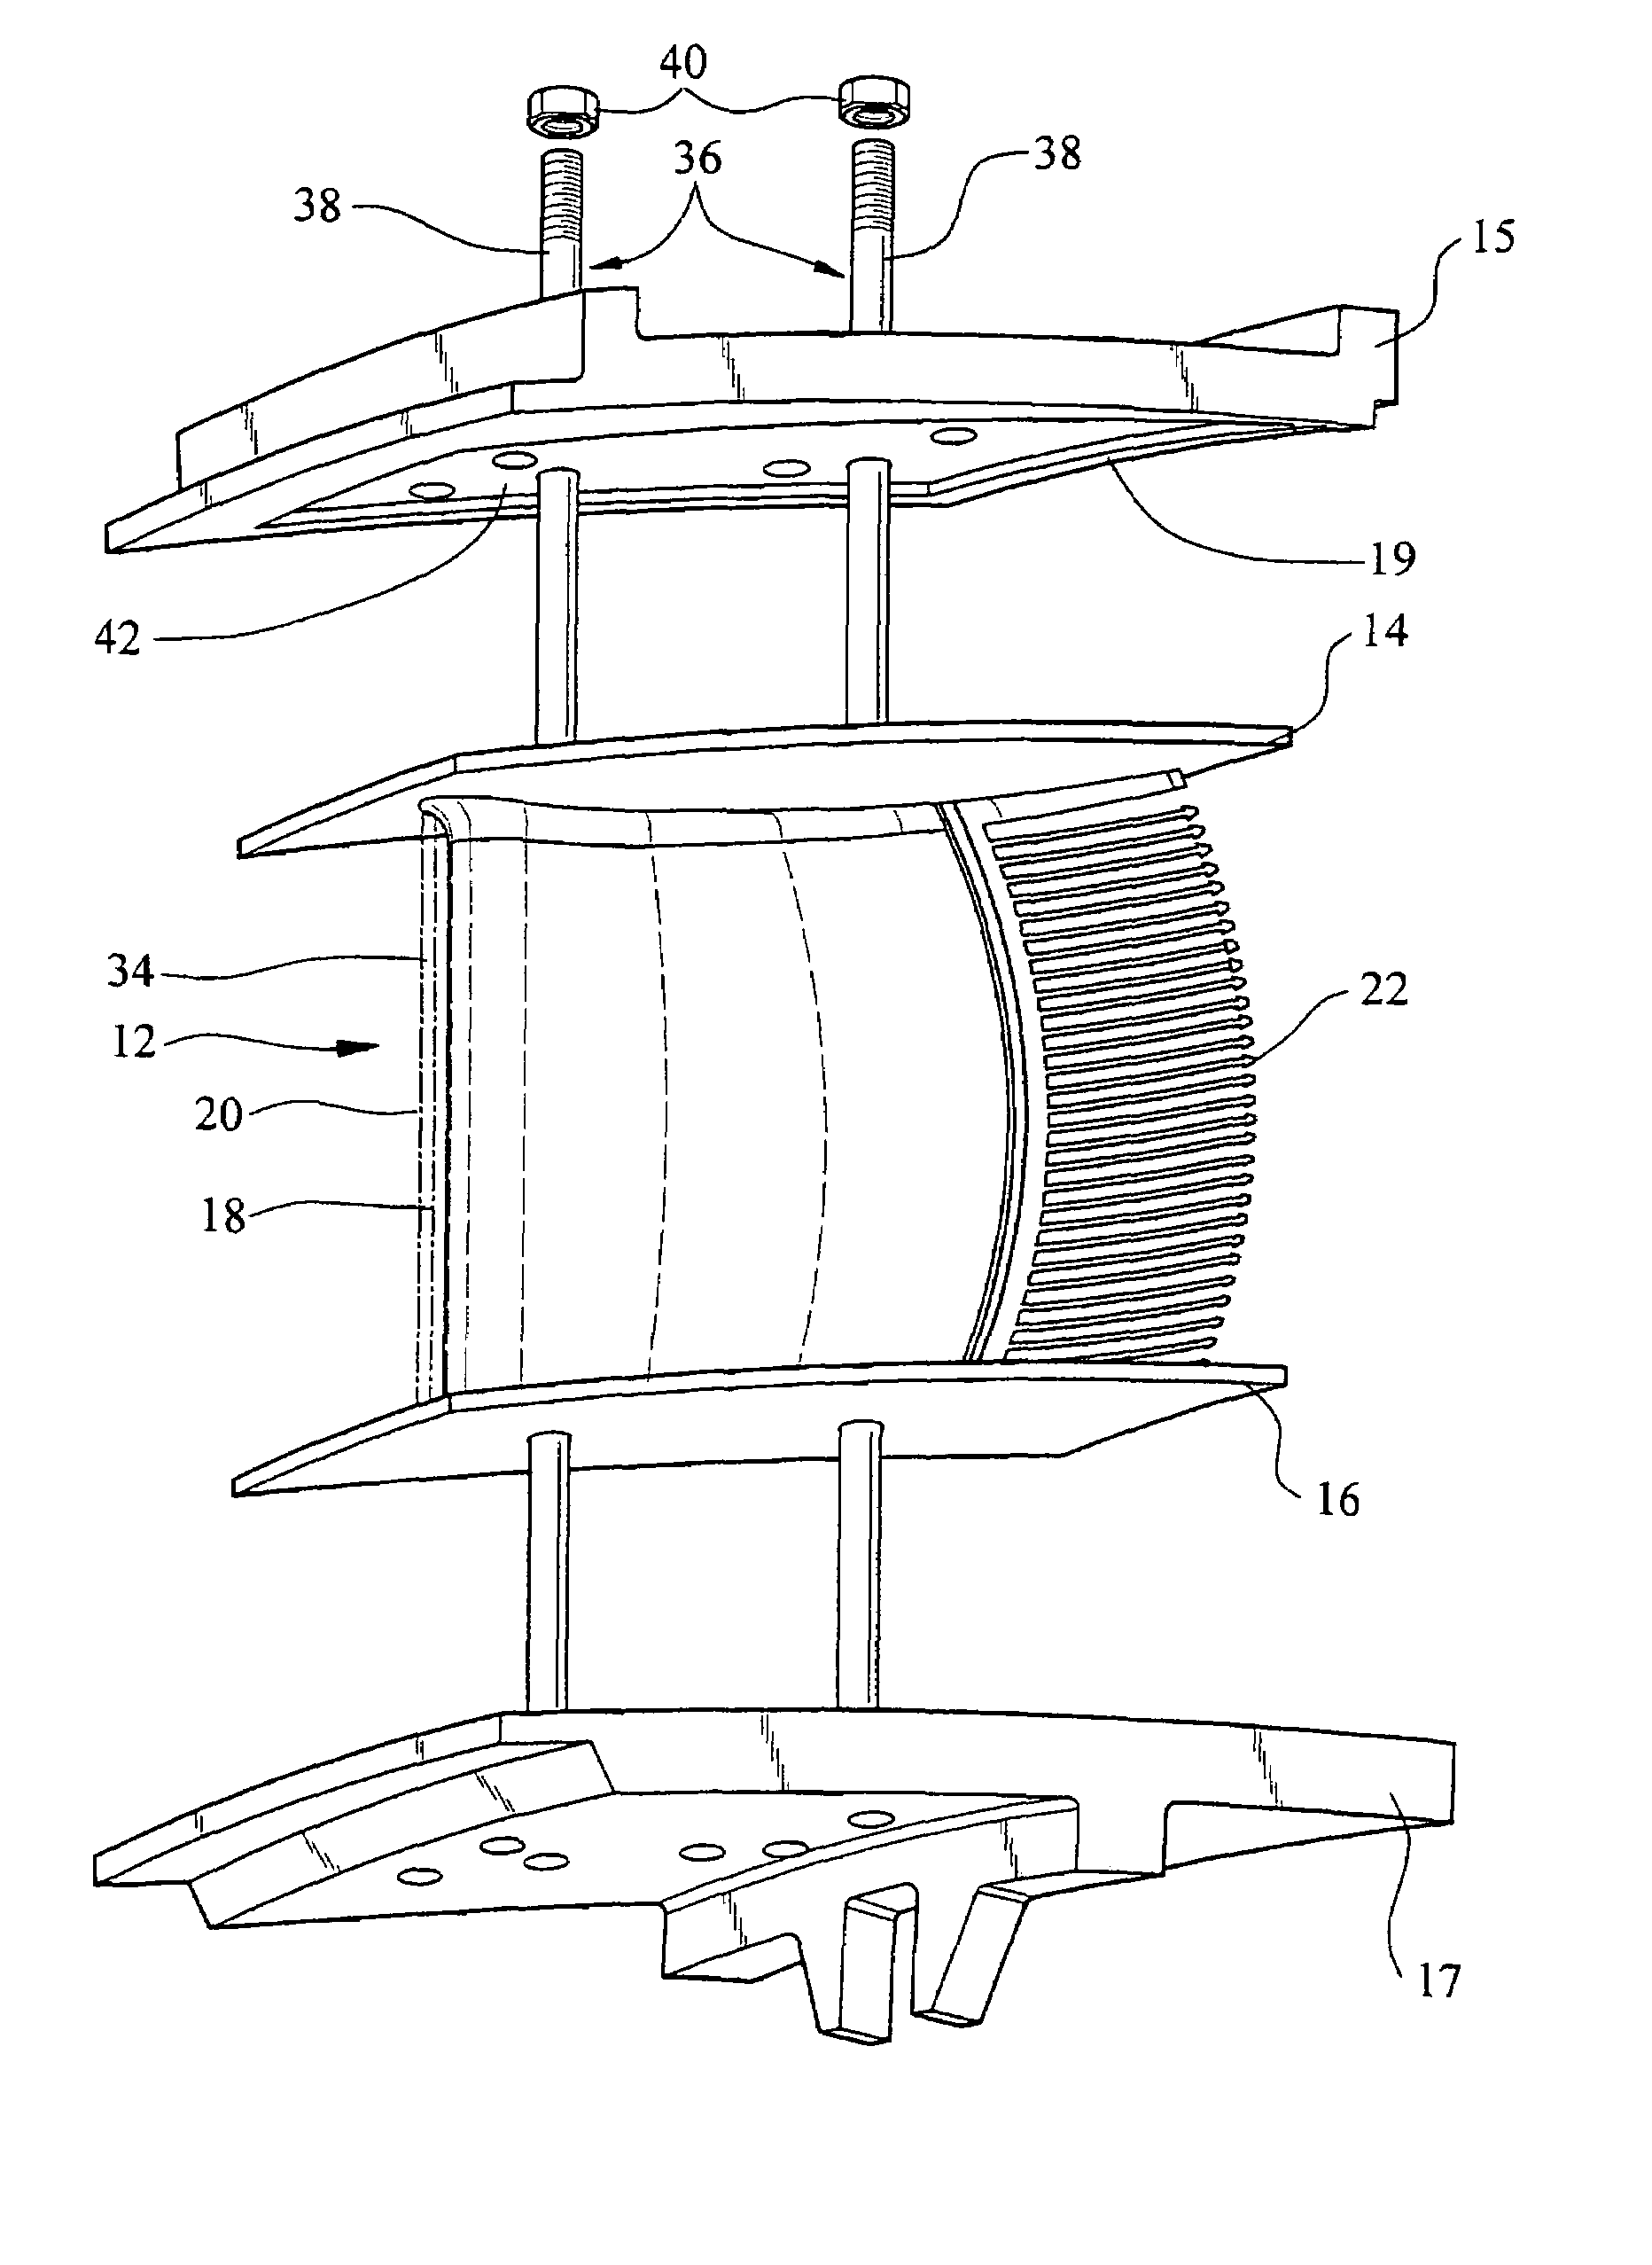 Support system for a composite airfoil in a turbine engine